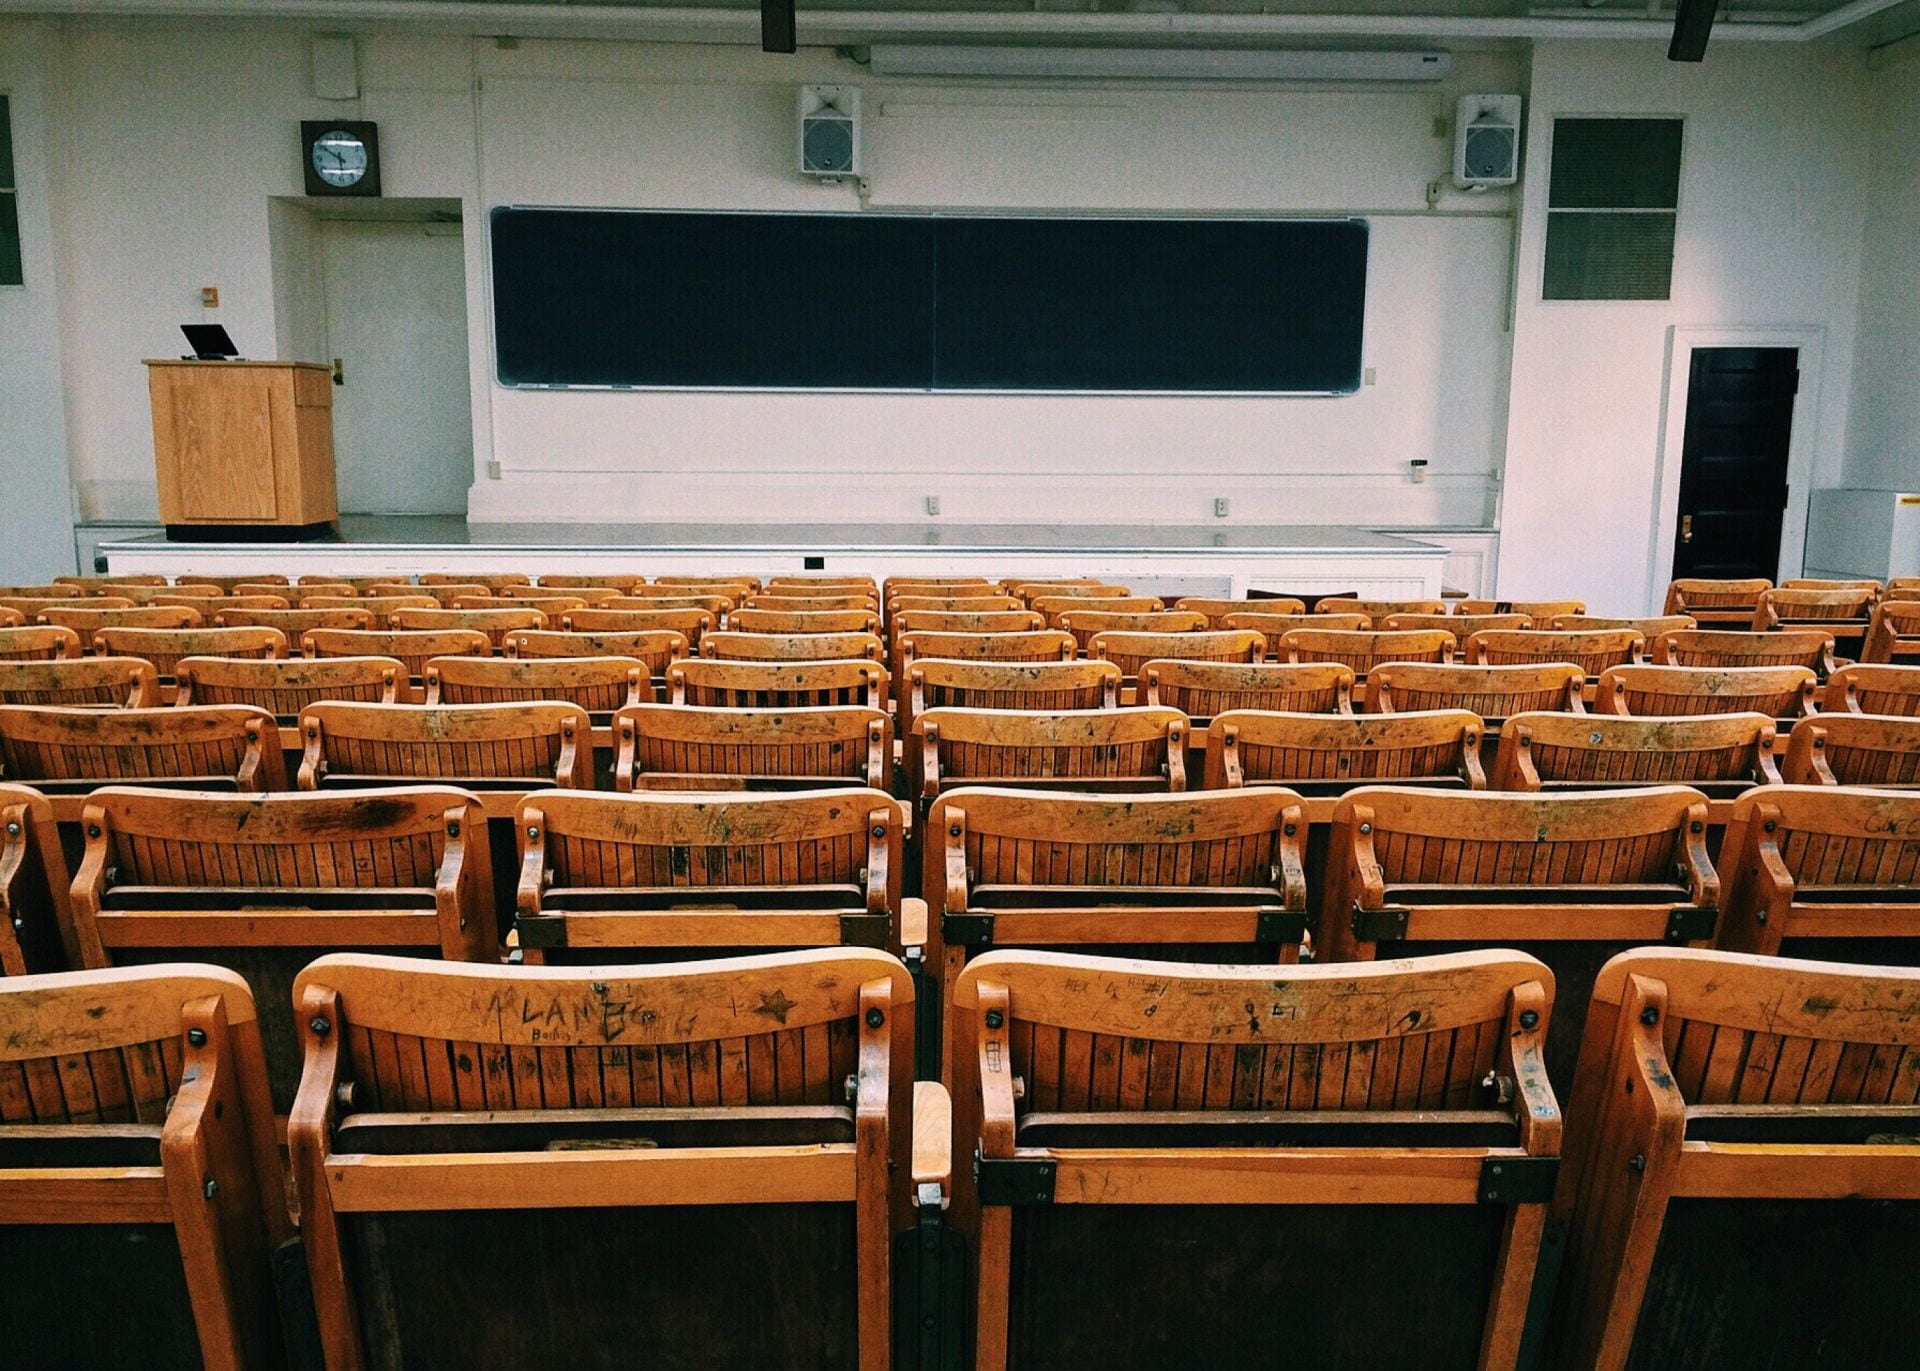 A lecture hall with chalkboards and old wooden chairs